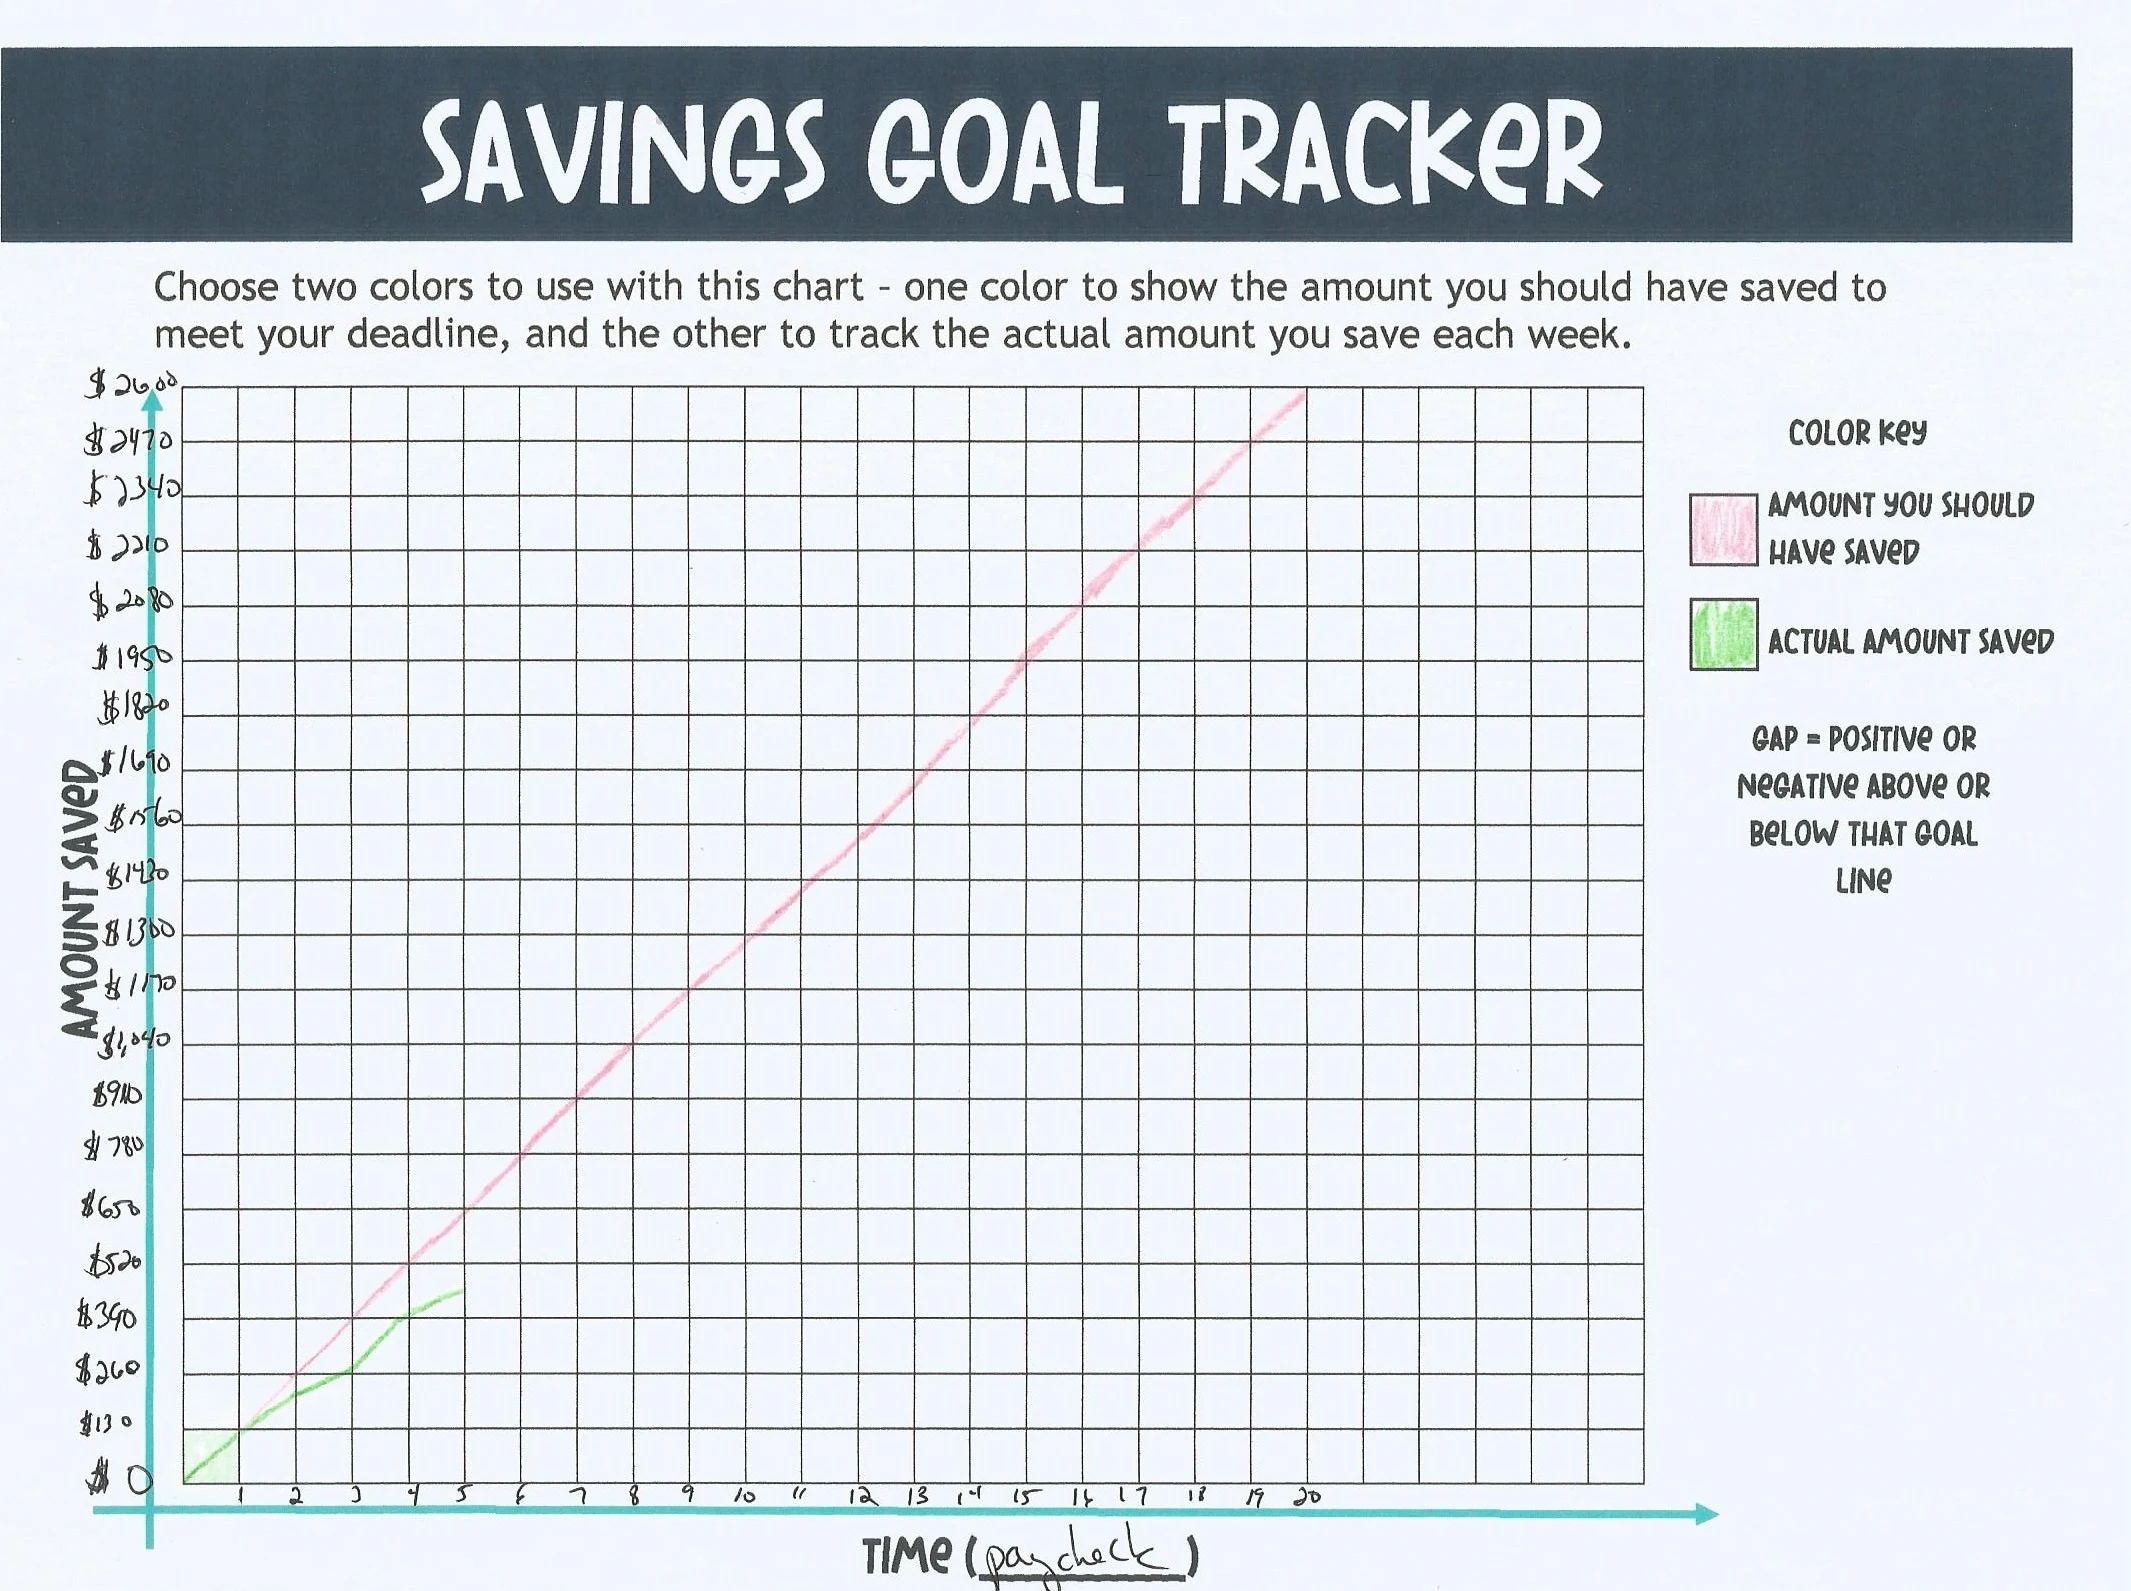 savings goal tracker filled in with the example, pink for amount you should save, green for actual amount saved